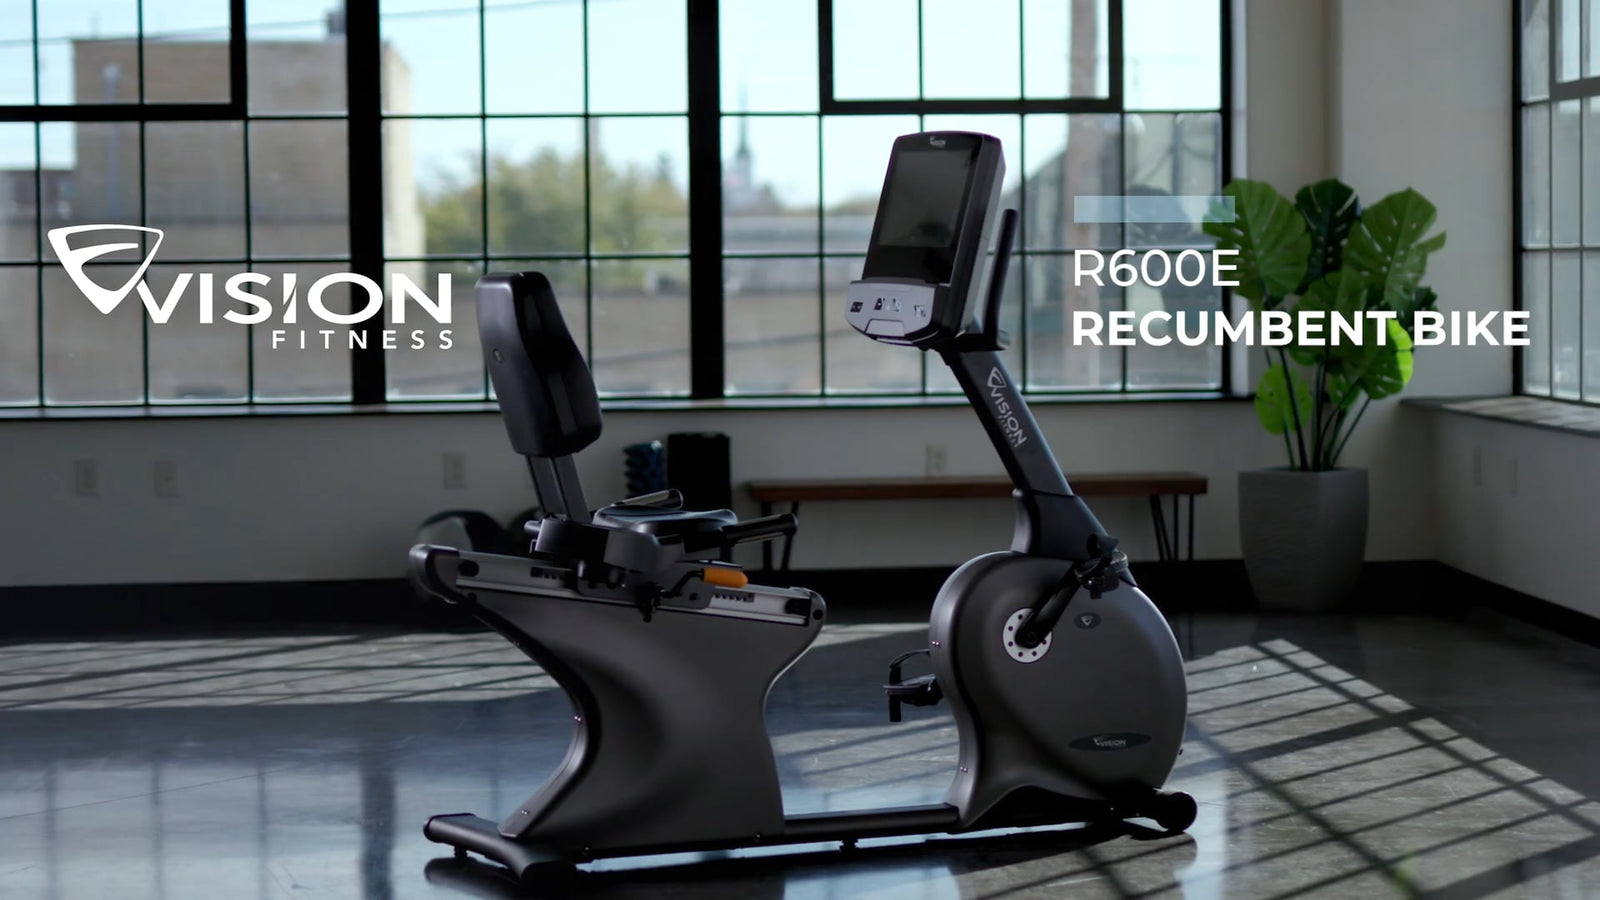 Recumbent bikes vs Upright bikes. What is the best for you?